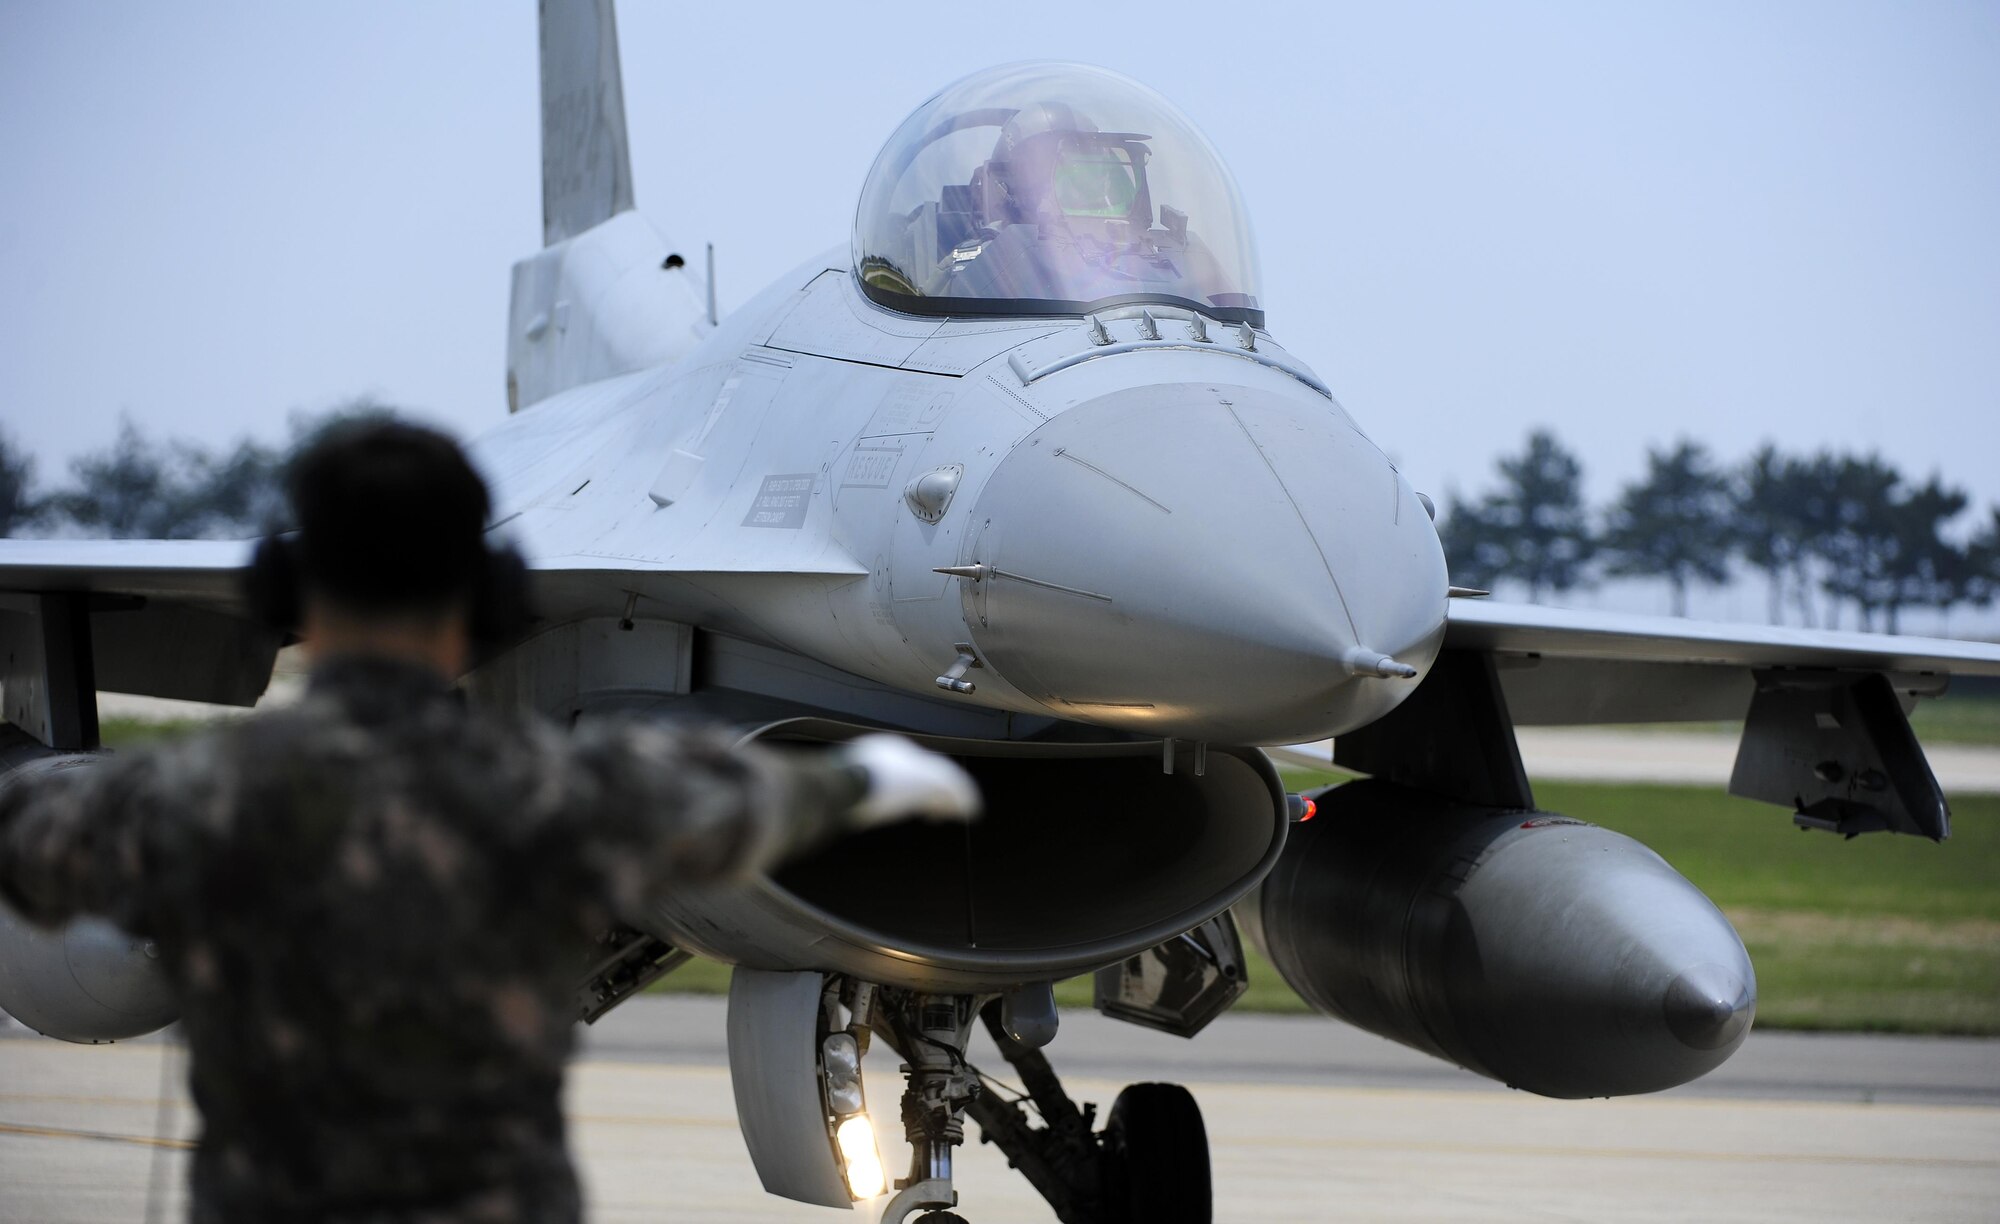 A South Korean air force crew chief marshals an F-16 Fighting Falcon from the 123rd Tactical Fighter Squadron, after it arrives at Kunsan Air Base, South Korea, for exercise Buddy Wing 15-4, June 1, 2015. In an effort to enhance U.S. and South Korean air force combat capability, Buddy Wing exercises are conducted multiple times throughout the year on the peninsula to sharpen interoperability between the allied forces so that if need be, they are always ready to fight as a combined force. (U.S. Air Force photo/Staff Sgt. Nick Wilson)